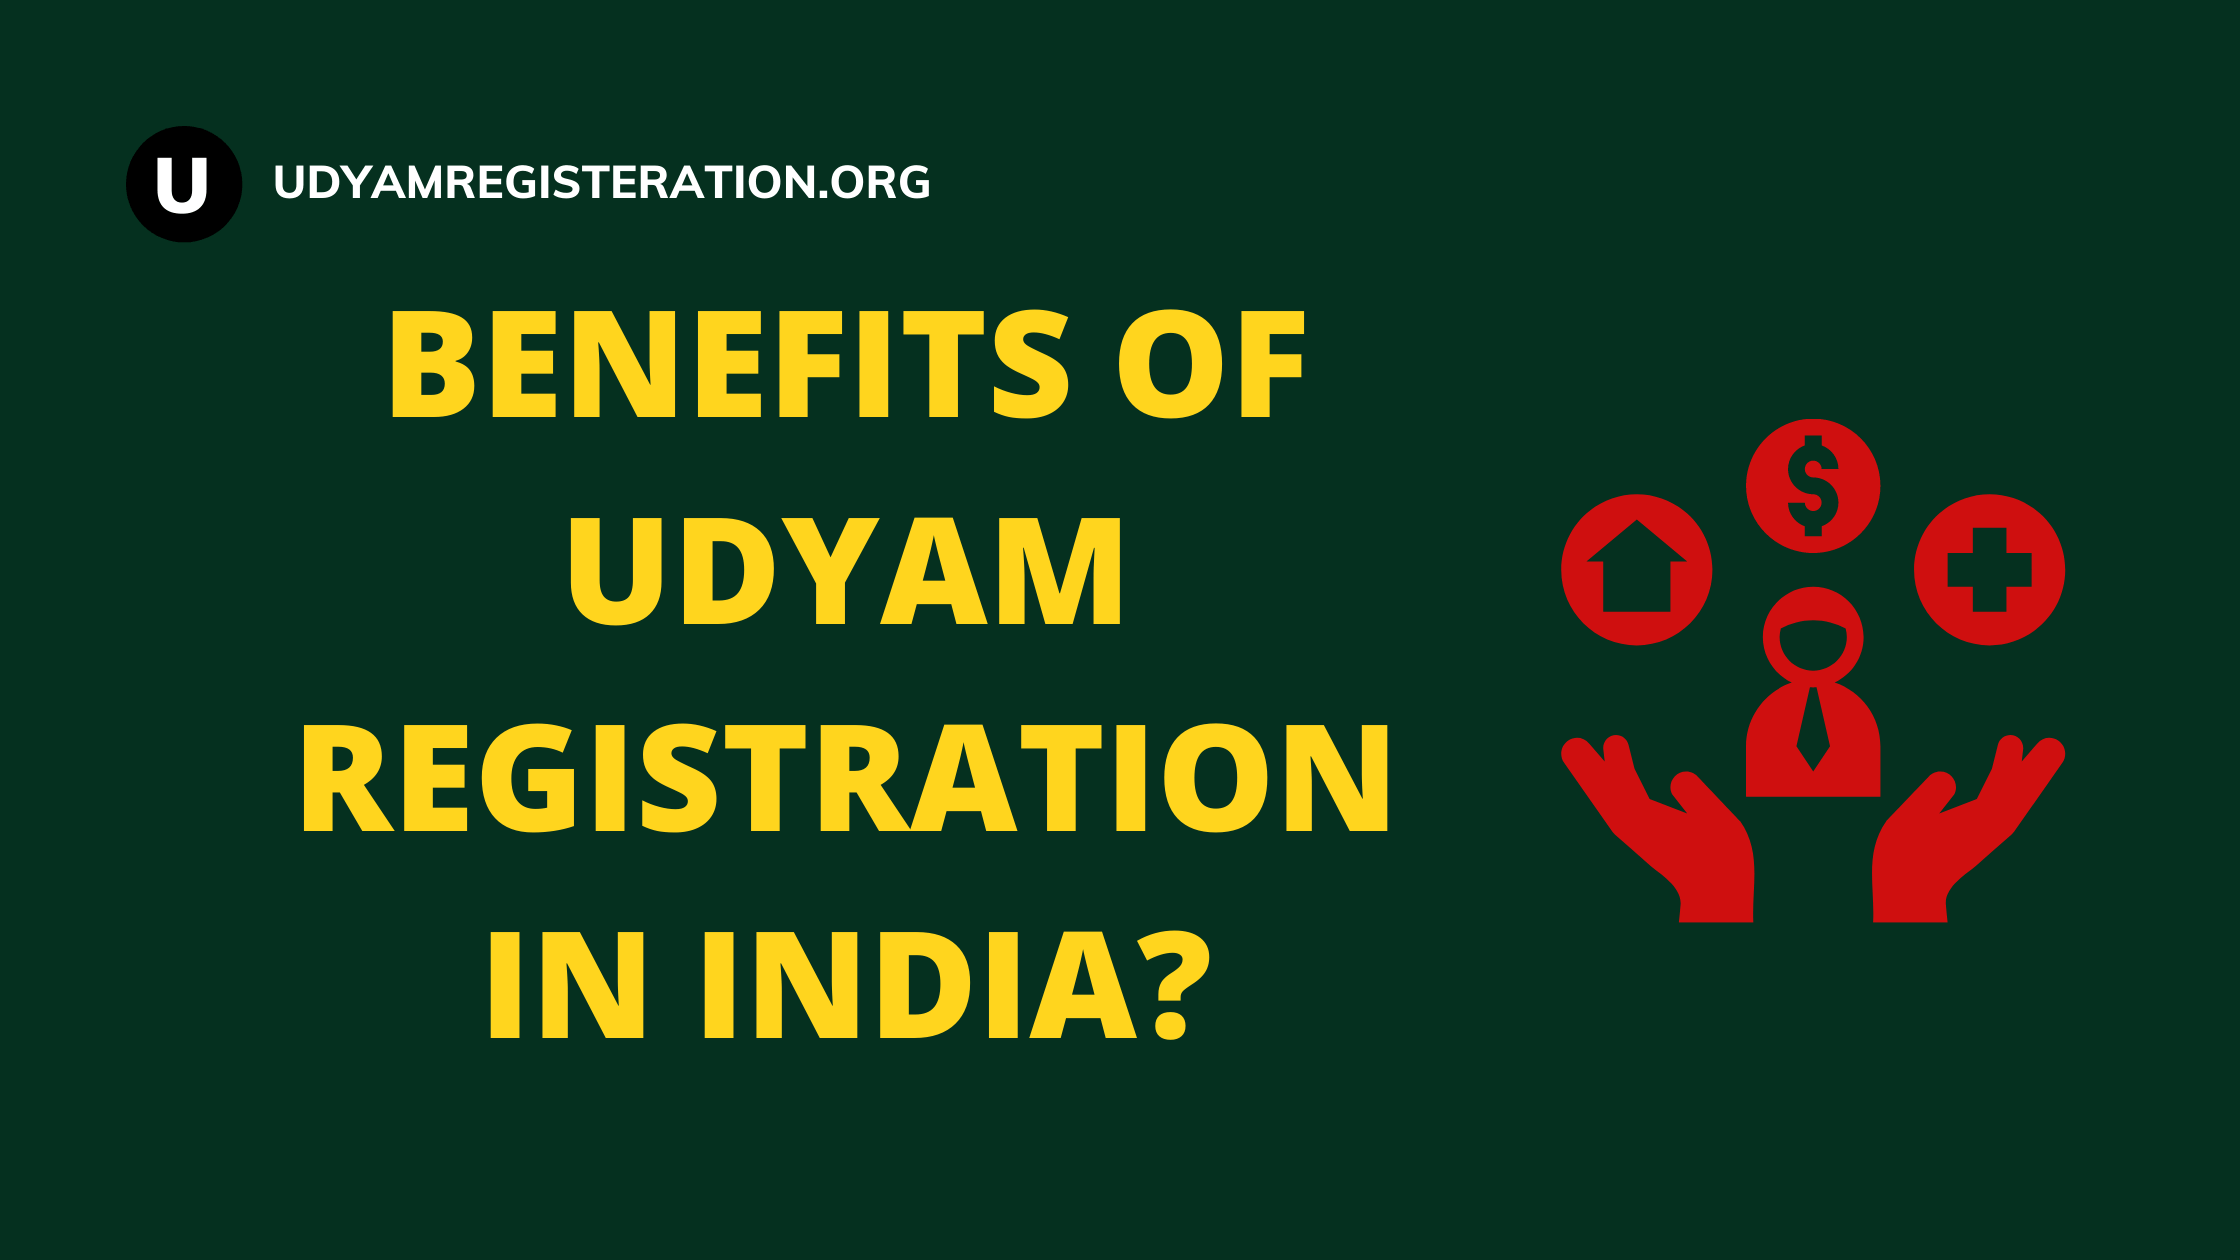 What are the Benefits of Udyam Registration in India?